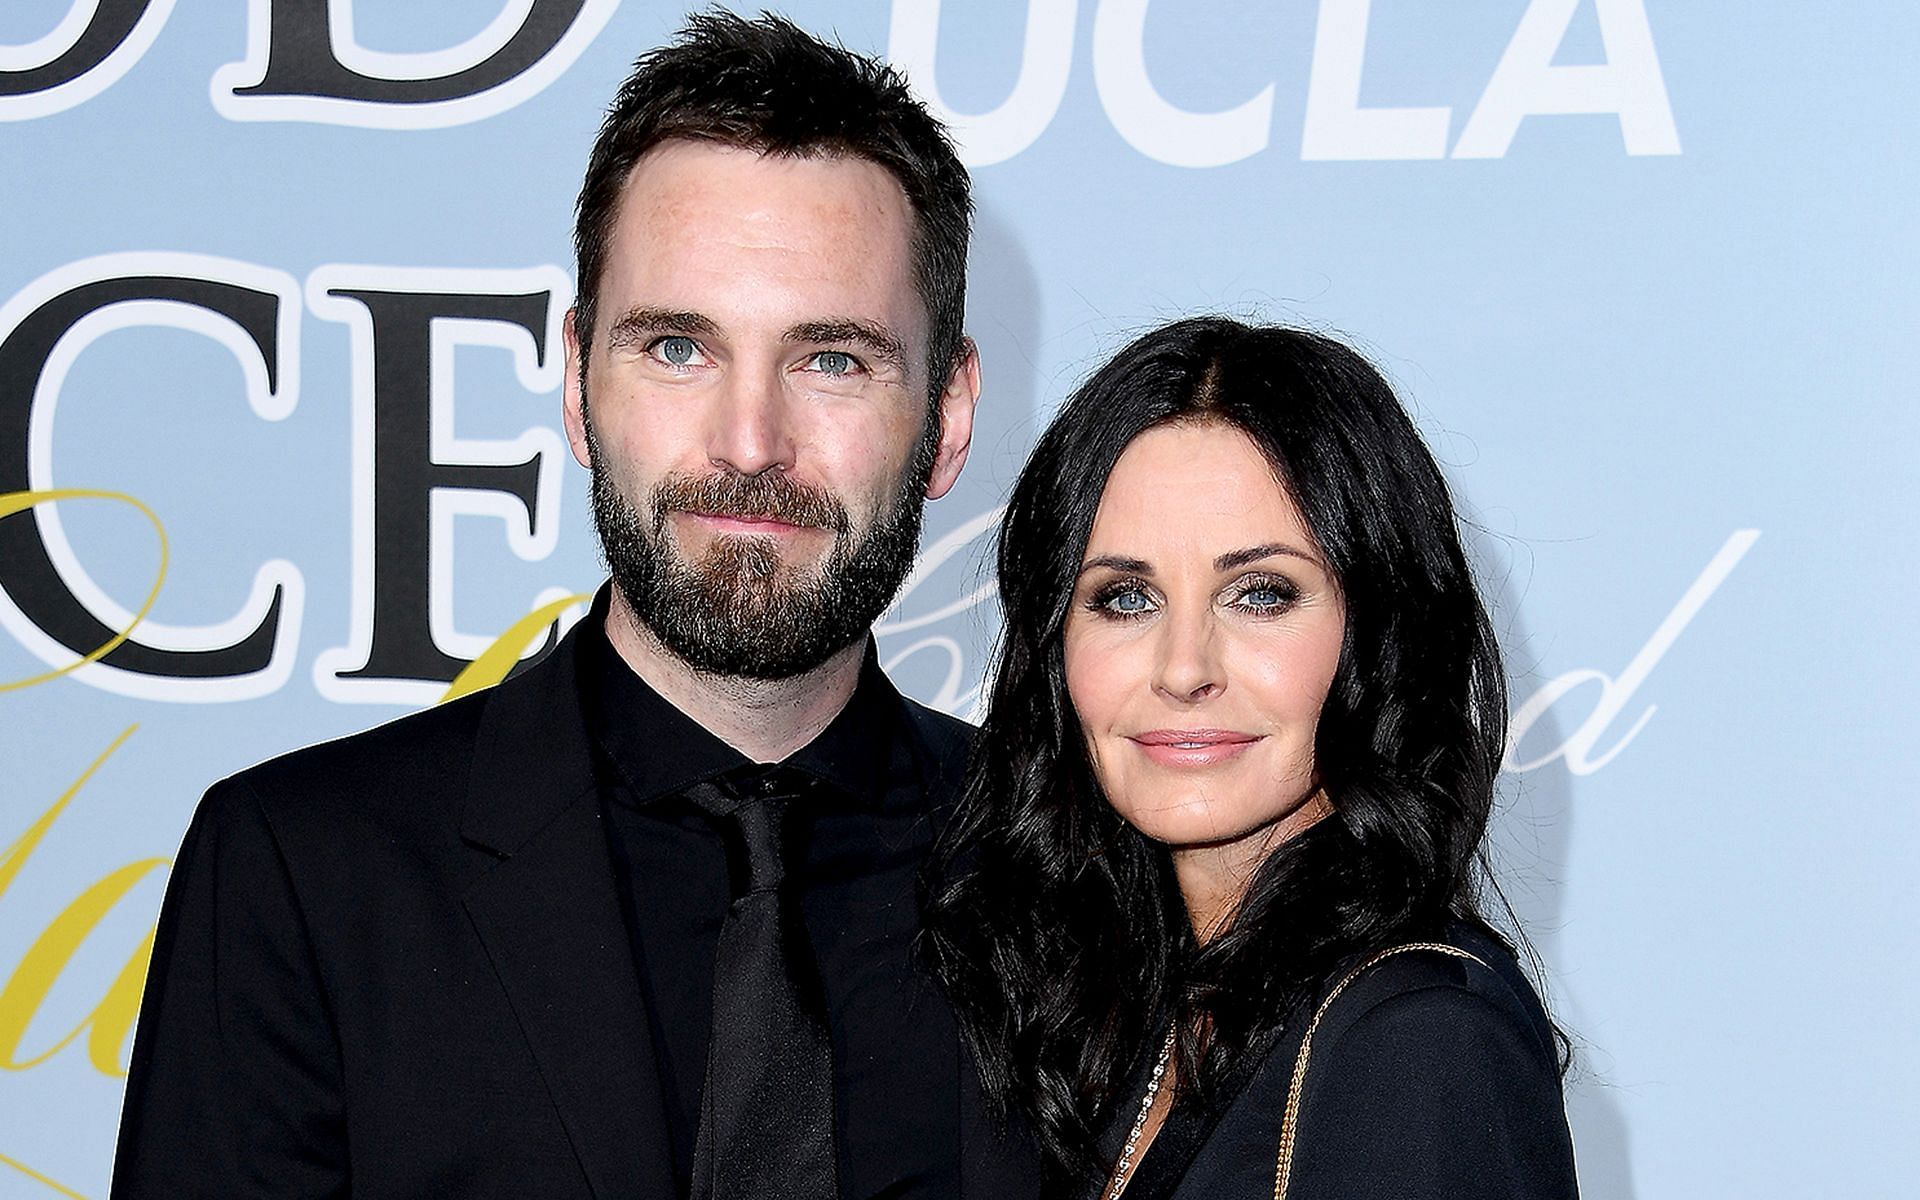 Johnny McDaid and Courtney Cox (Image via People)